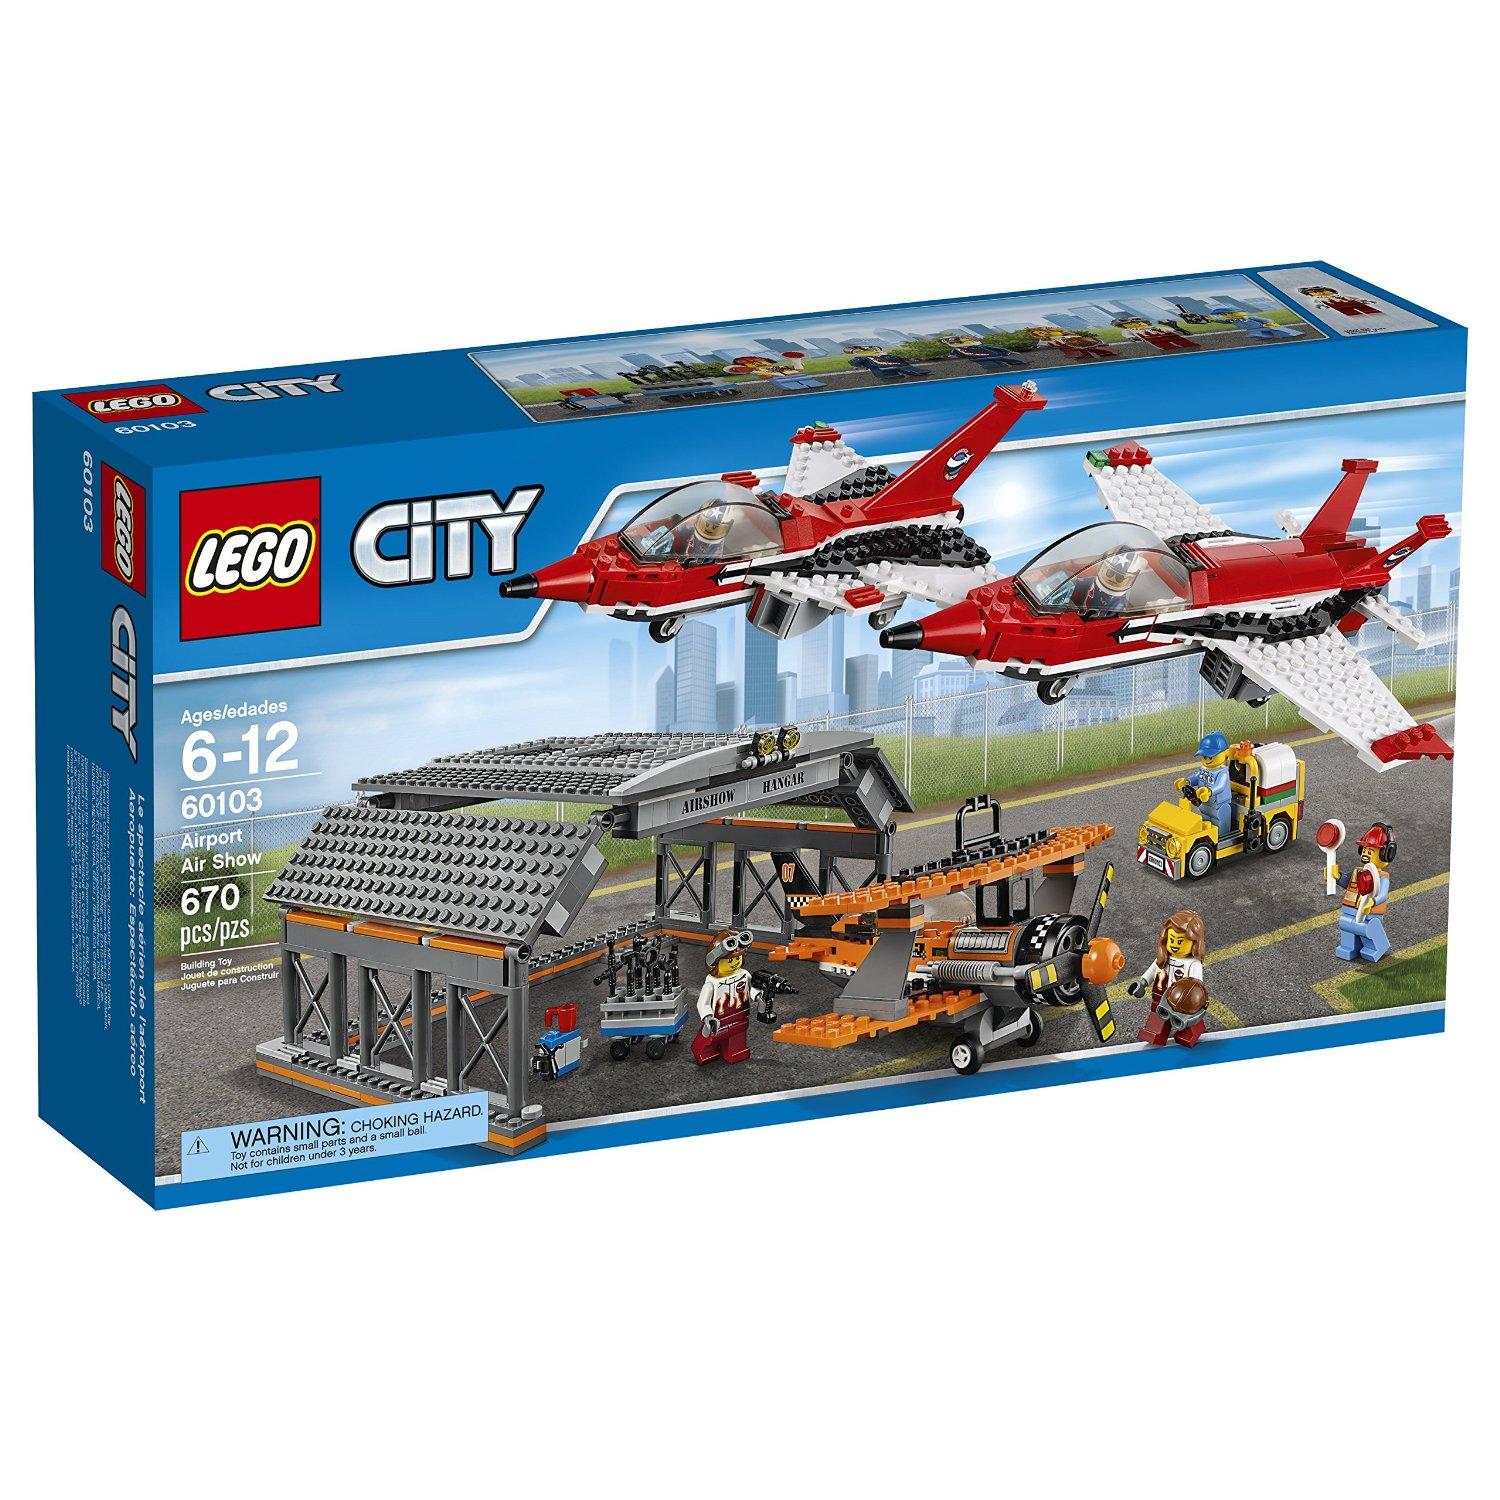 Amazon: LEGO City Airport Airport Air Show Building Kit Only $58.00 Shipped! (Reg. $89.99)